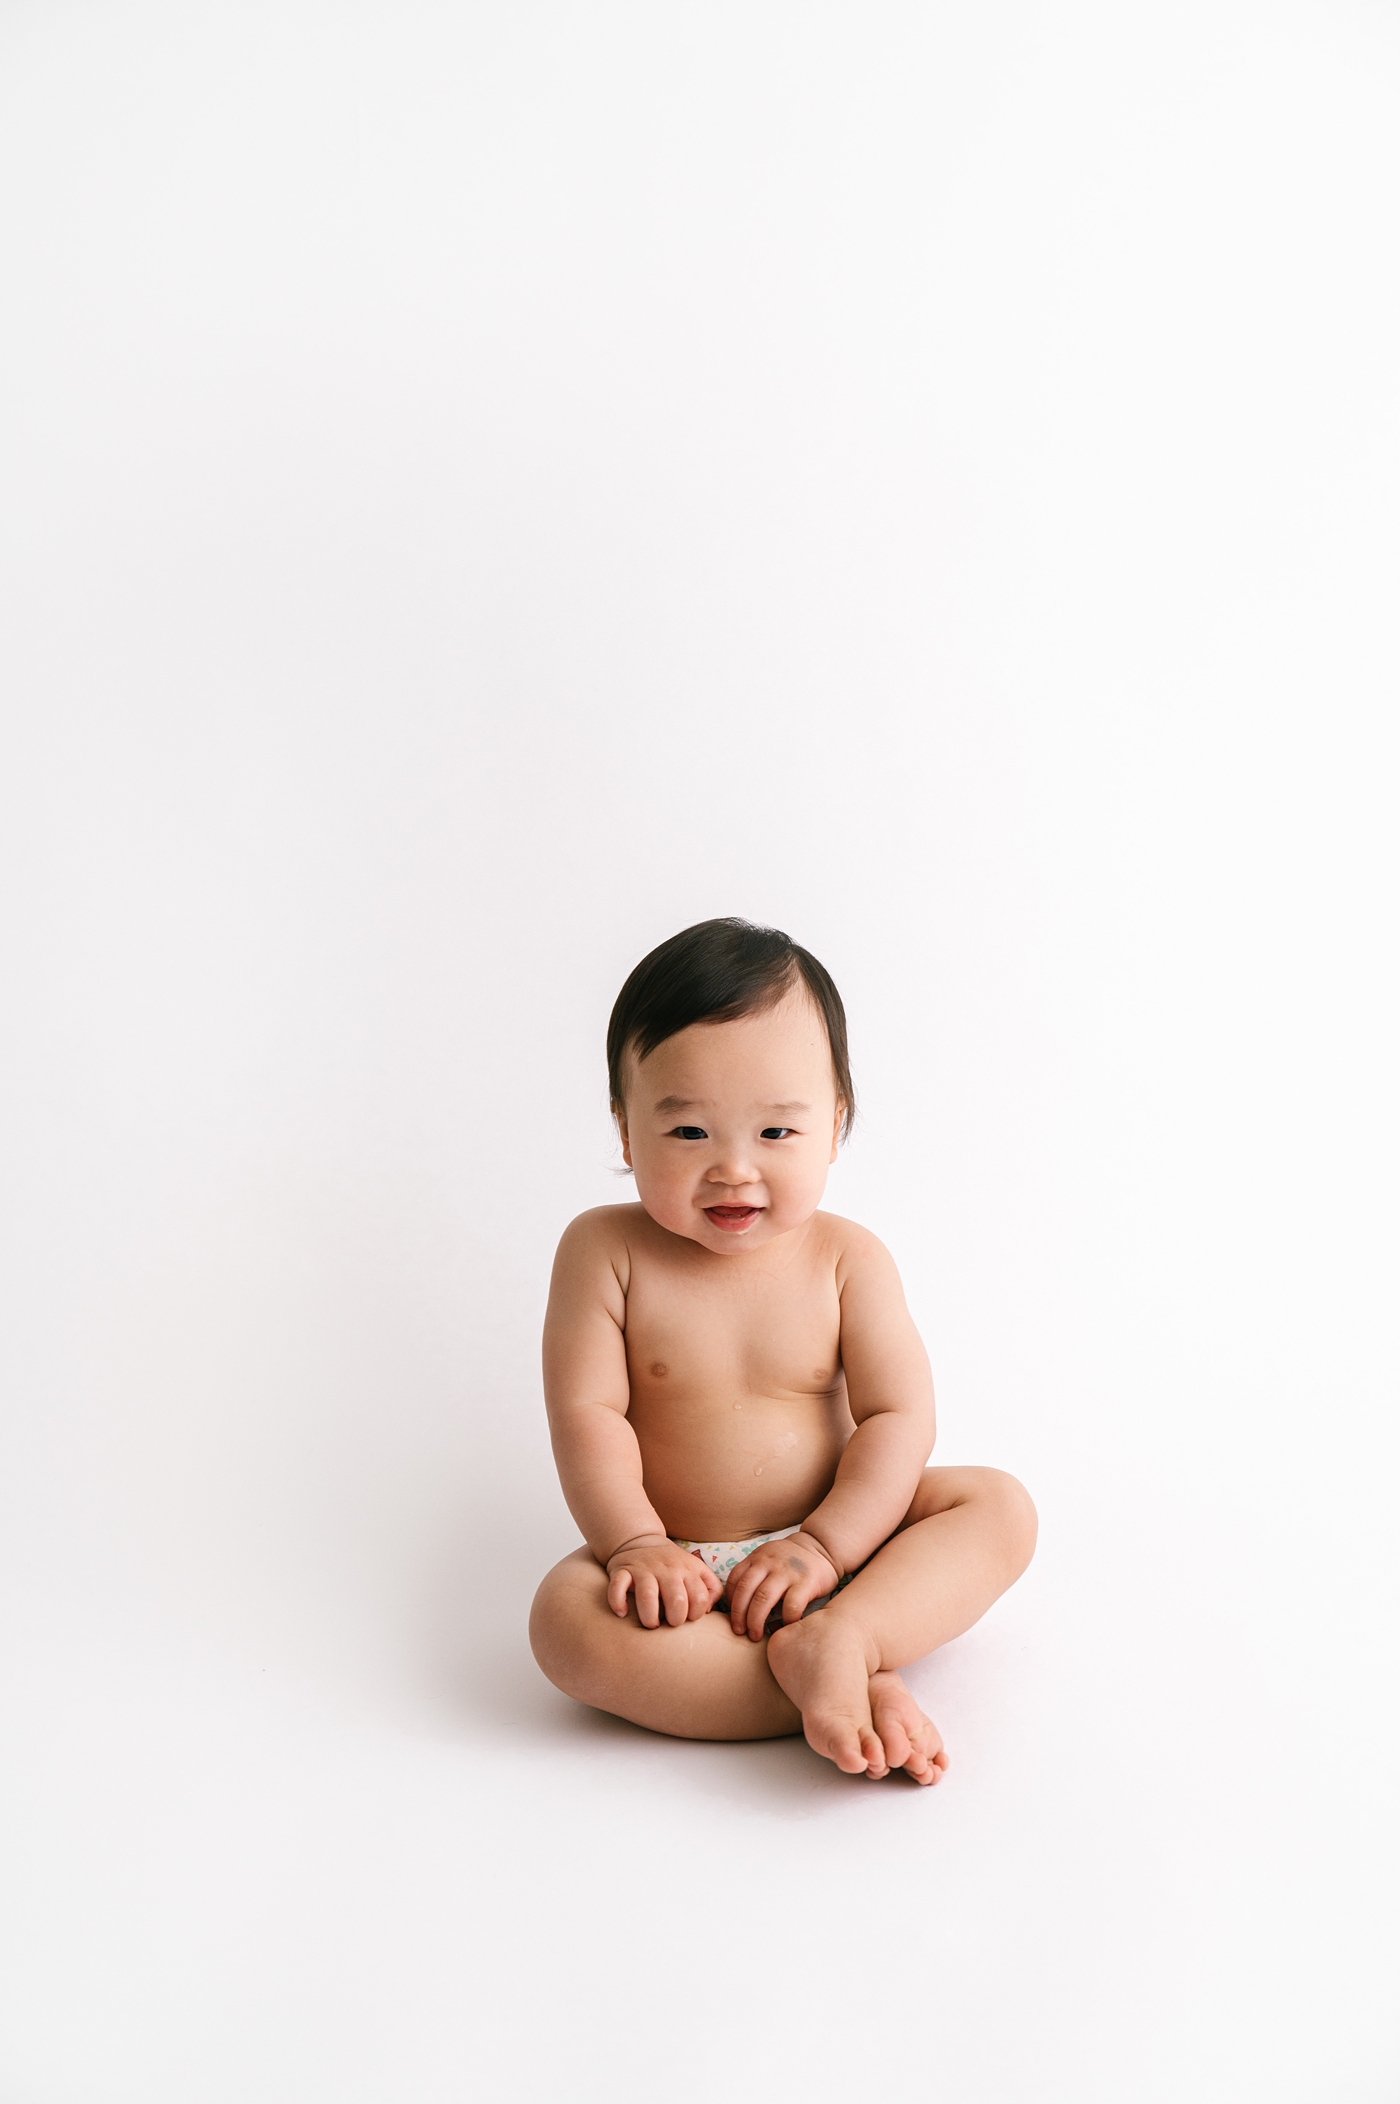 Baby boy sits criss-cross applesauce while being photographed. Photo by Meg Newton Photography.